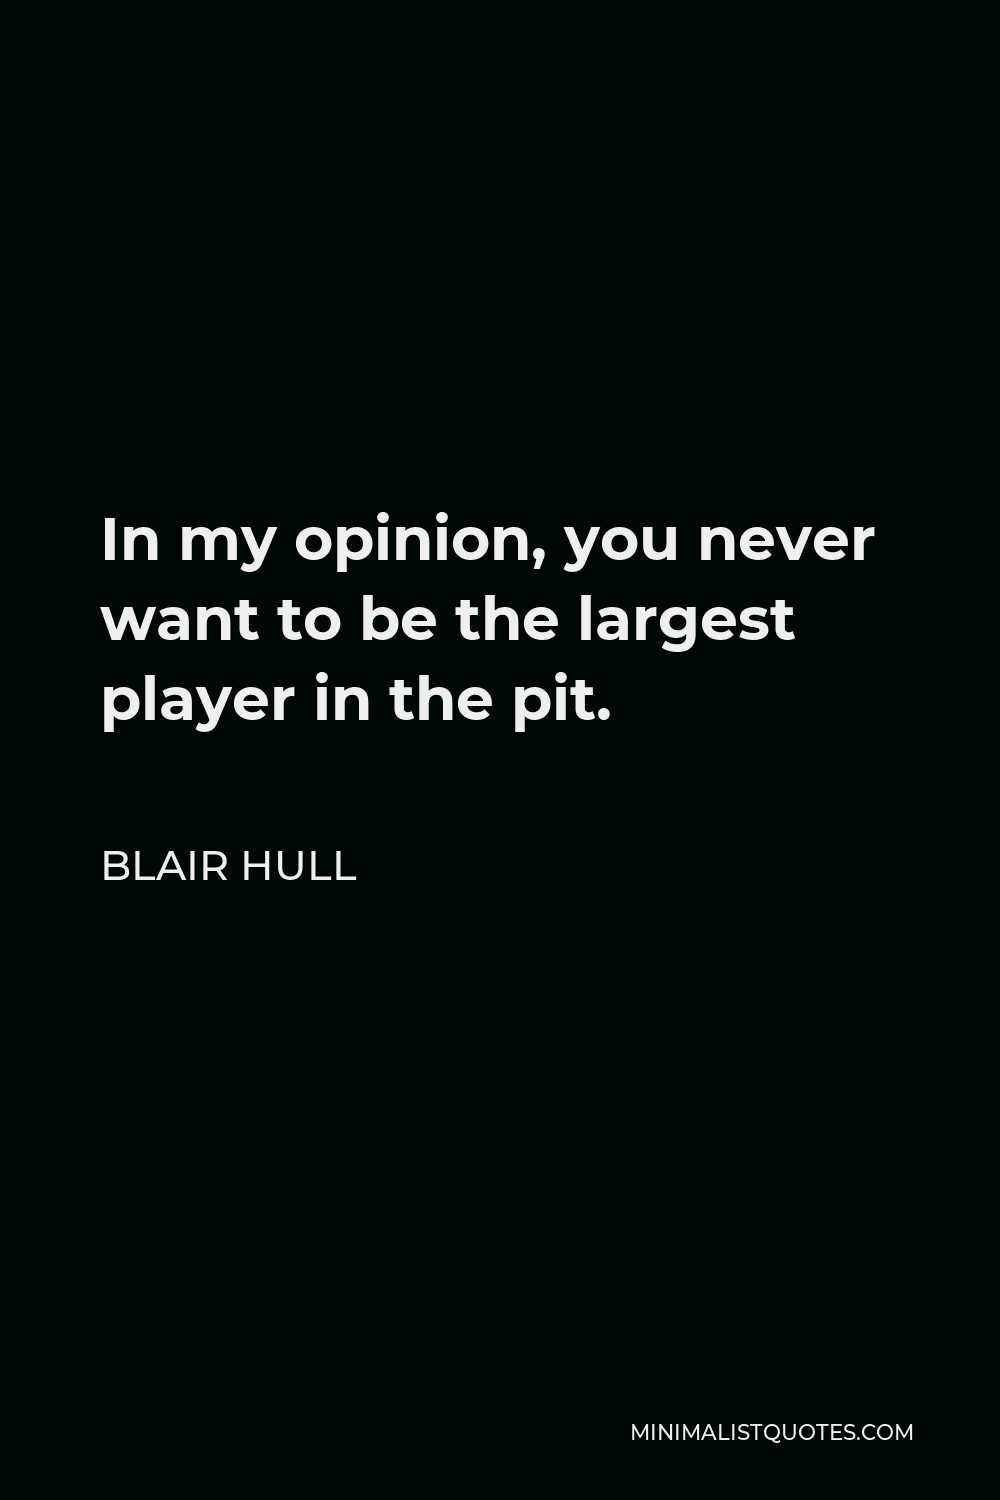 Blair Hull Quote - In my opinion, you never want to be the largest player in the pit.